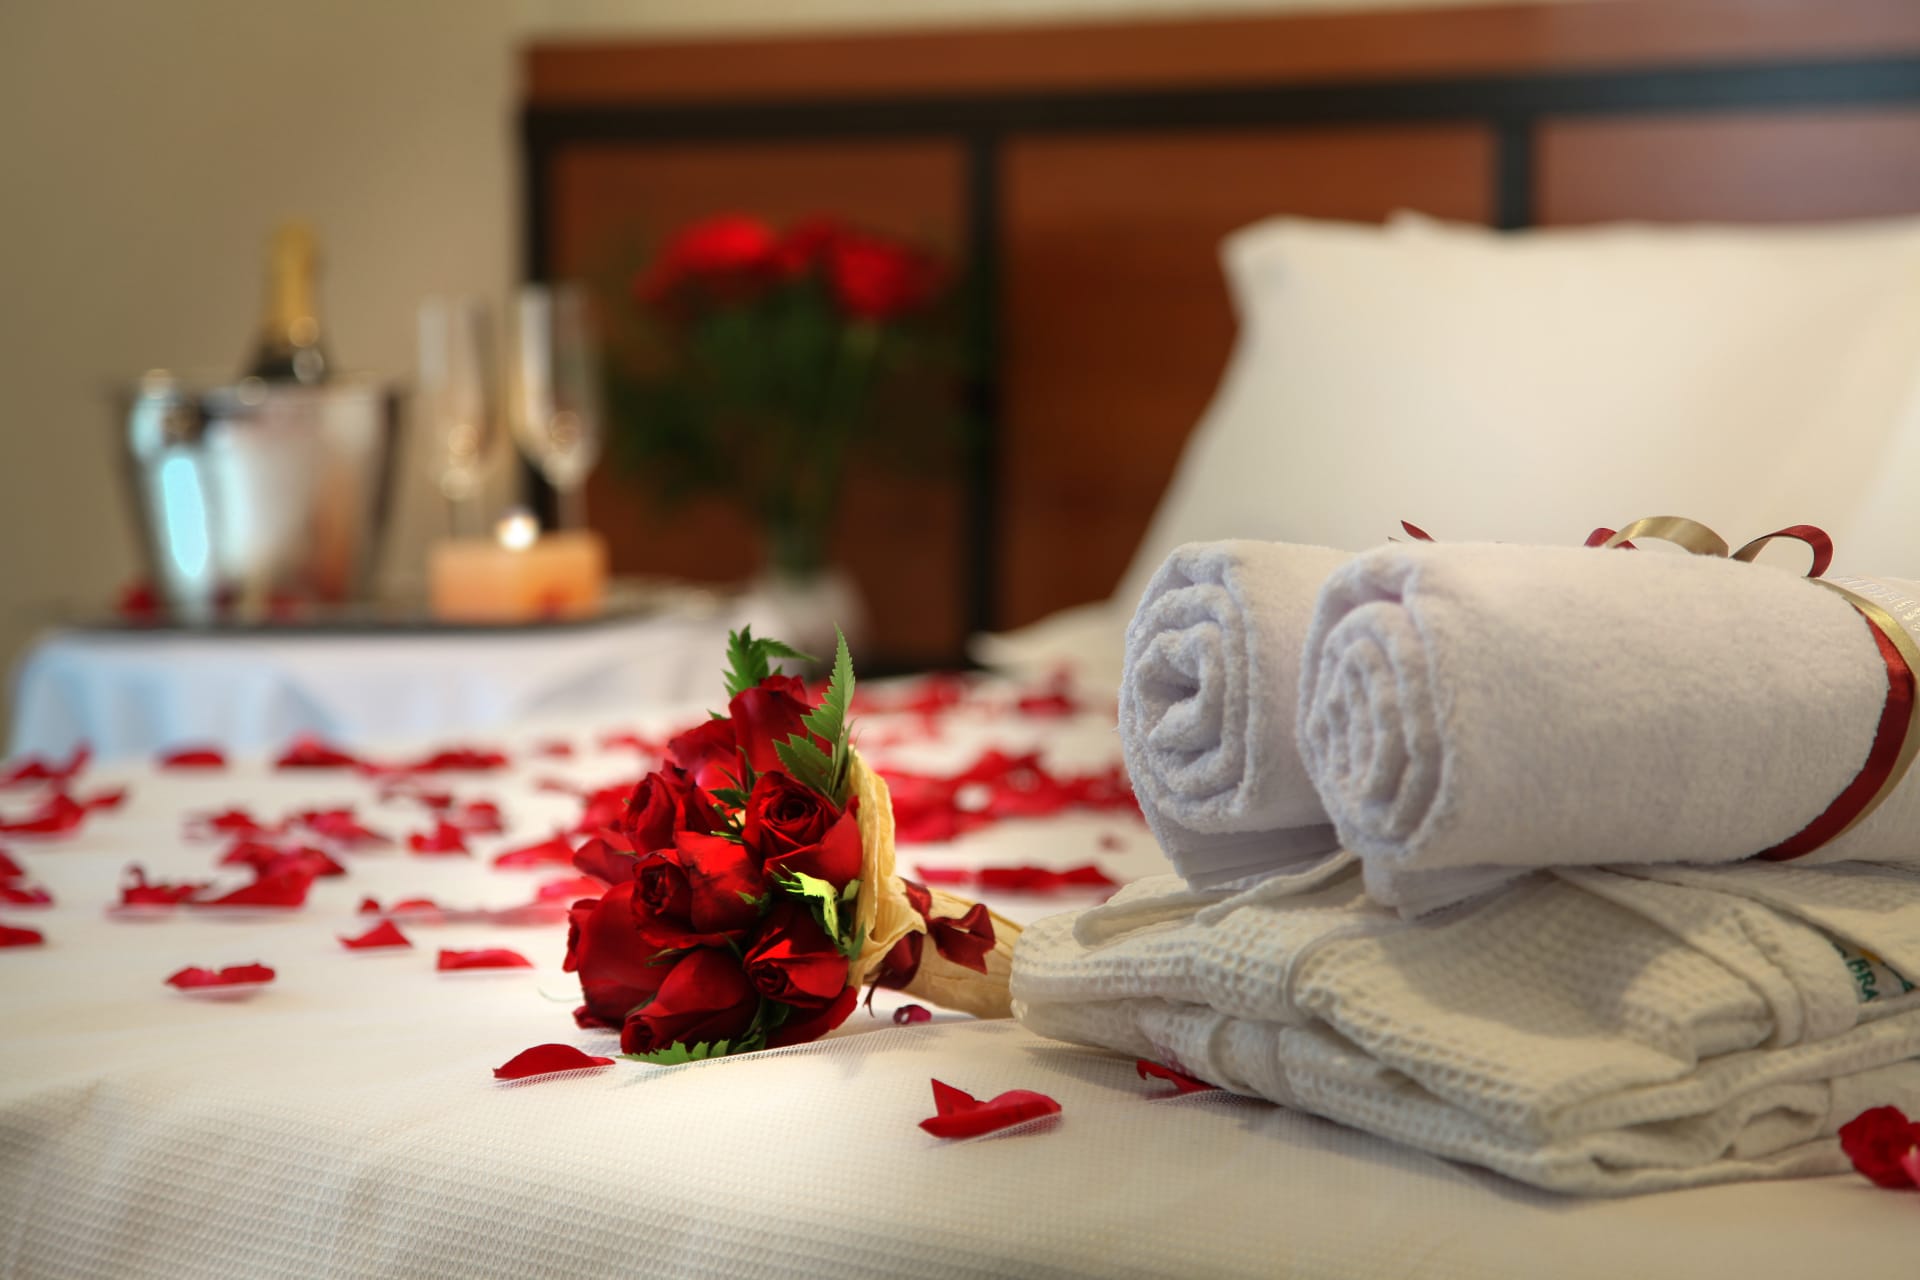 towels, bathrobes and roses on a hotel bed